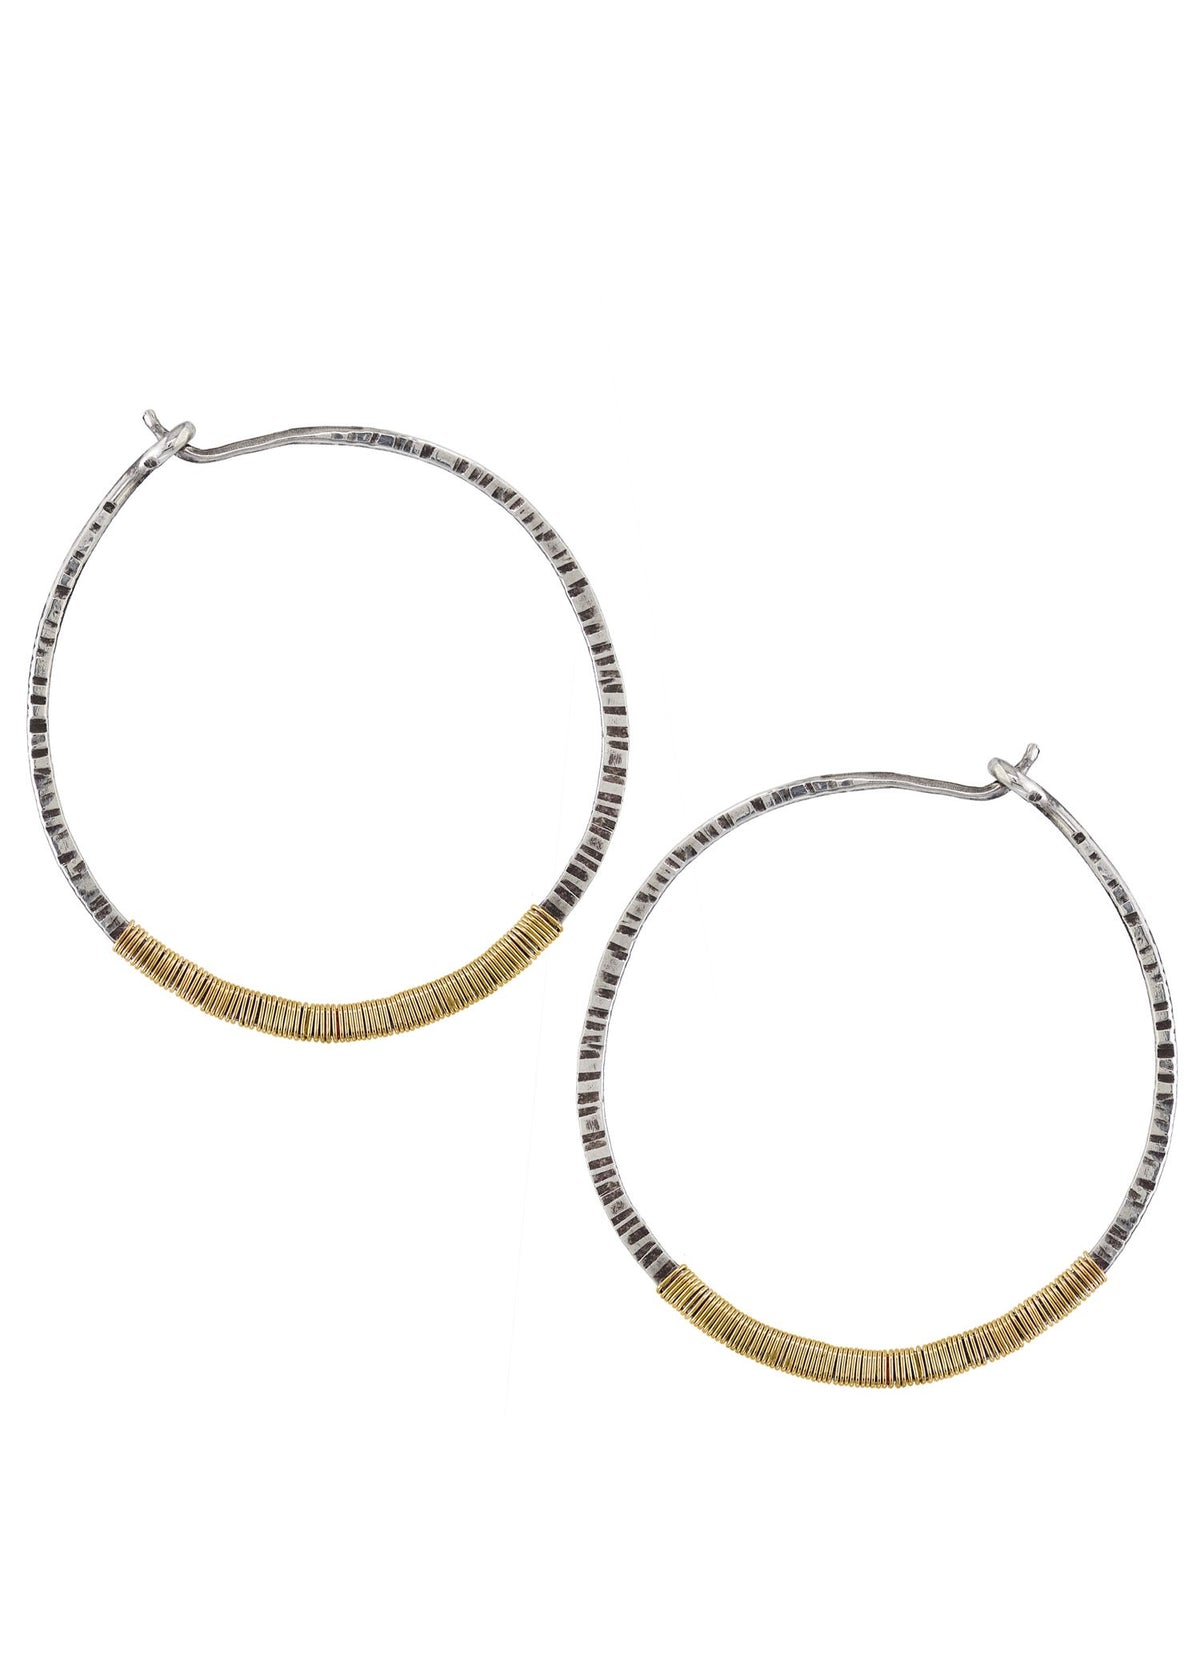 14k gold fill Sterling silver Mixed metal Earrings measure 1-1/2&quot; in length and 1-1/2 in width Handmade in our Los Angeles studio